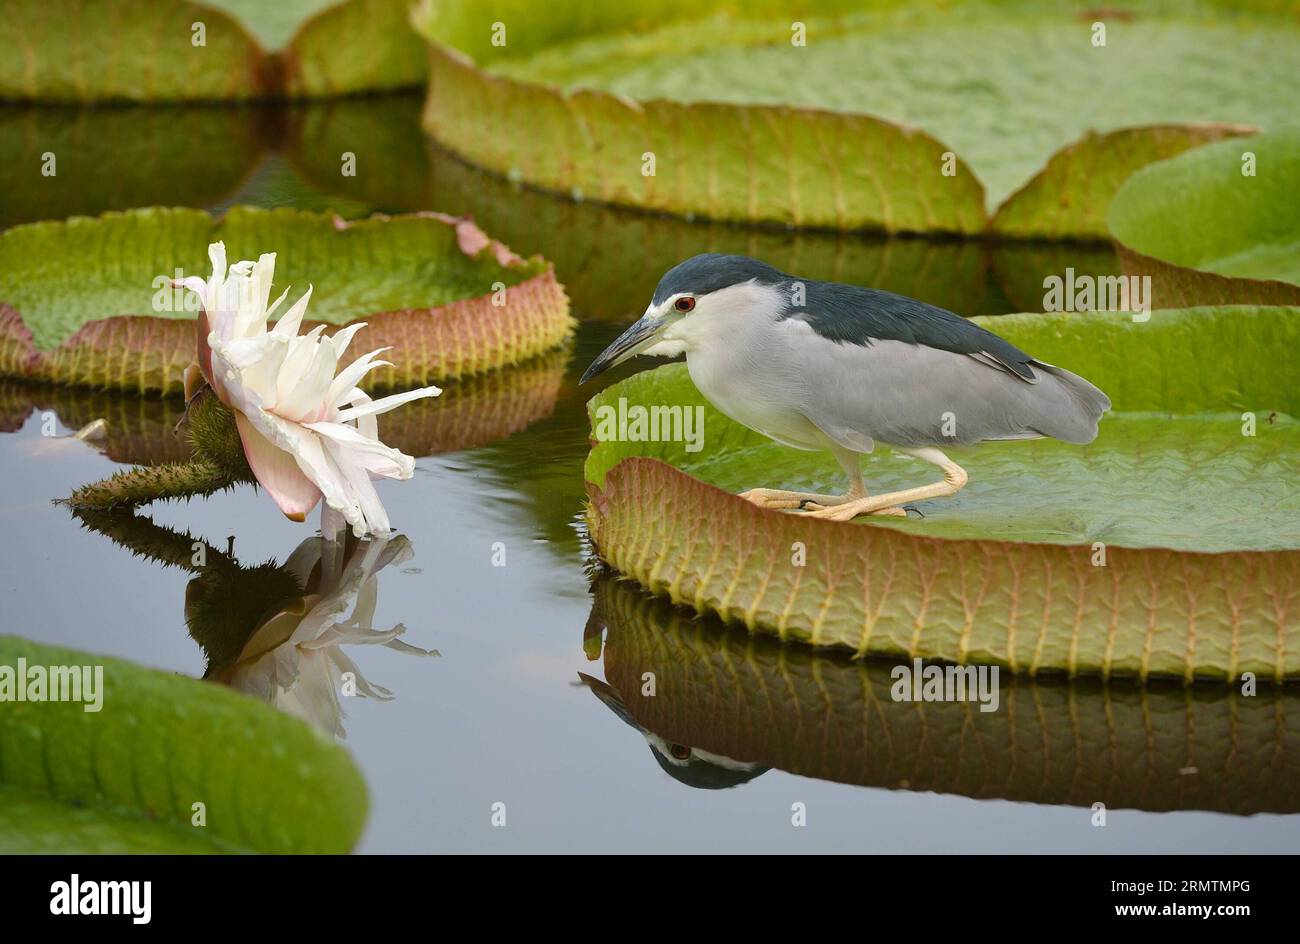 (140911) -- TAIPEI, Sept. 11, 2014 -- A night heron rests on a giant leaf of a Victoria during an aquatic plants exhibition at the Shuangxi Park in Taipei, southeast China s Taiwan, Sept. 11, 2014. Victoria is a genus of water-lilies, in the plant family Nymphaeaceae, with very large green leaves that lie flat on the water s surface. The leaf of Victoria is able to support quite a large weight due to the plant s structure, although the leaf itself is quite delicate. )(yxb) CHINA-TAIPEI-SHUANGXI PARK-VICTORIA-GIANT LEAF (CN) WangxQingqin PUBLICATIONxNOTxINxCHN   Taipei Sept 11 2014 a Night Hero Stock Photo